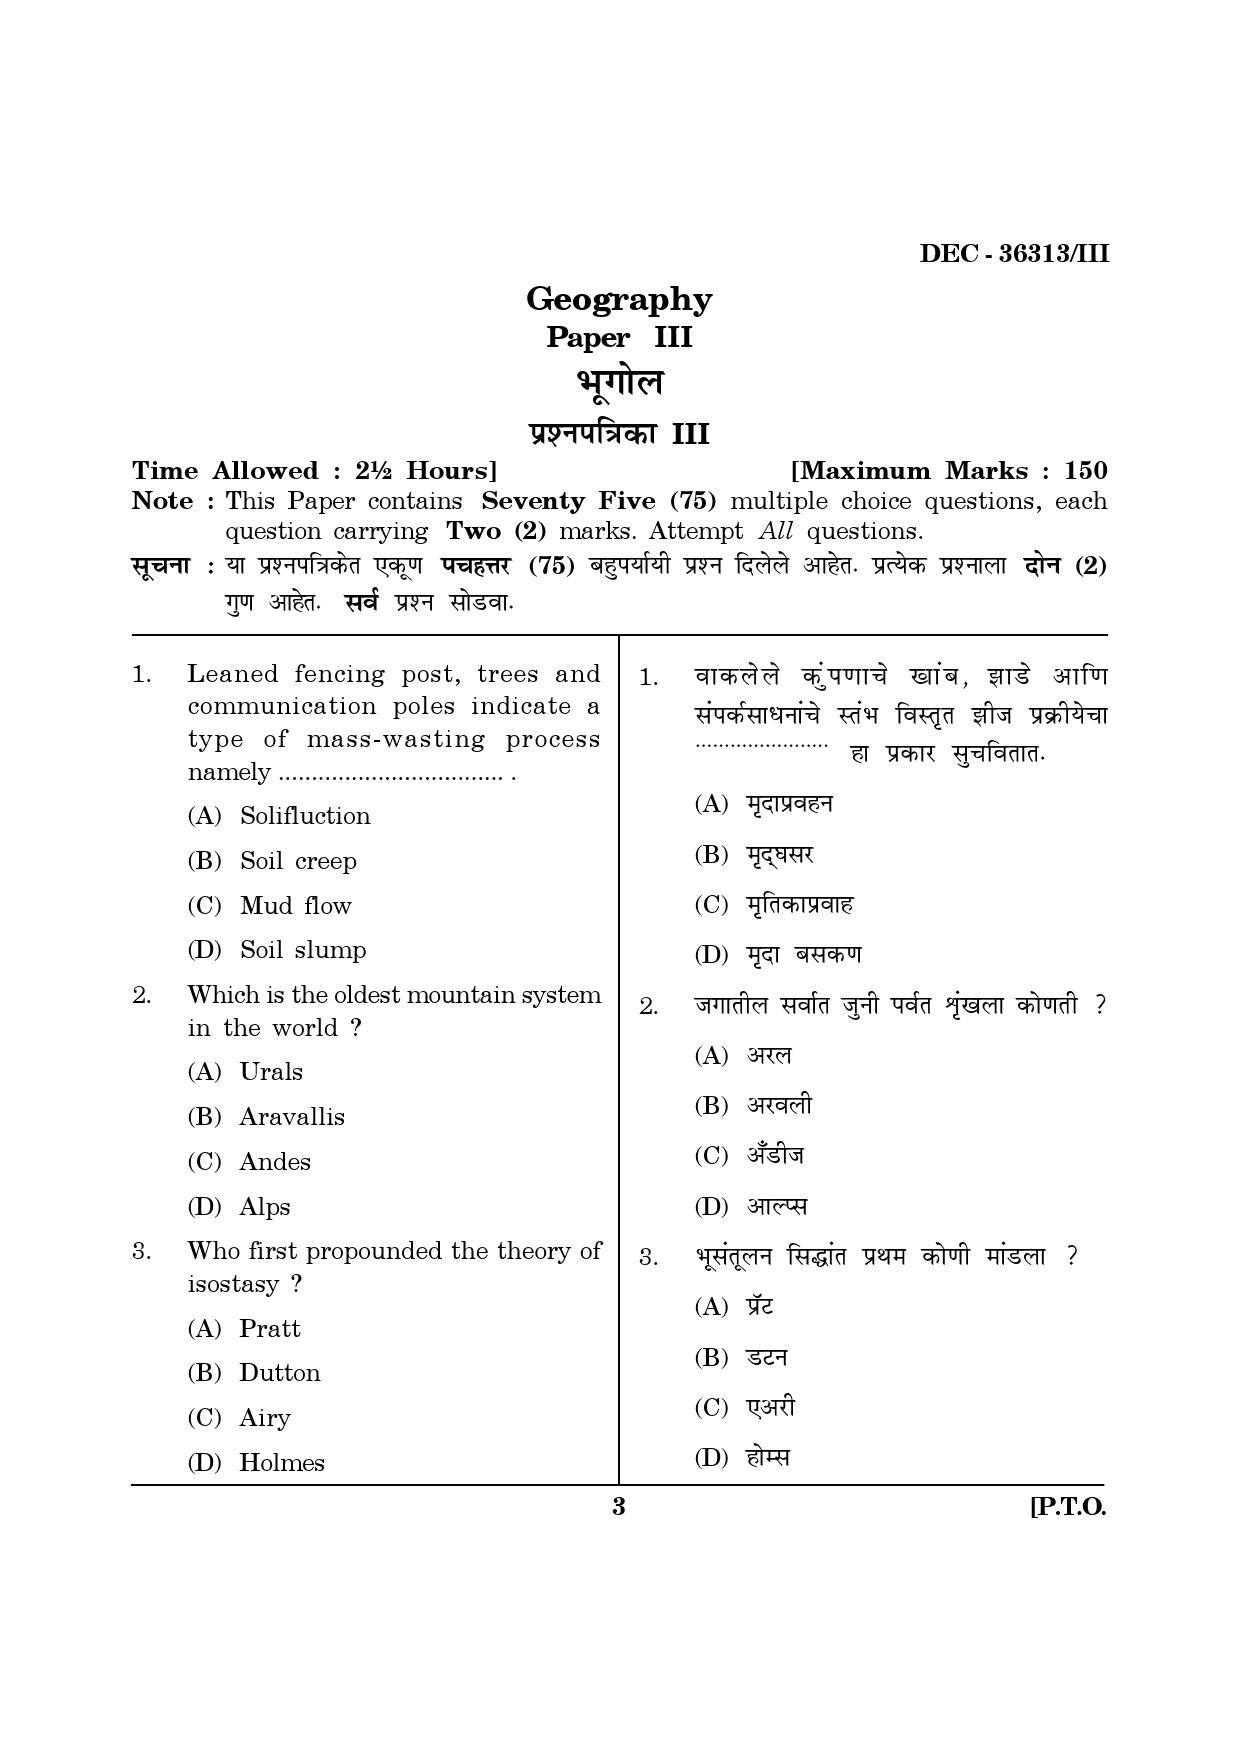 Maharashtra SET Geography Question Paper III December 2013 2